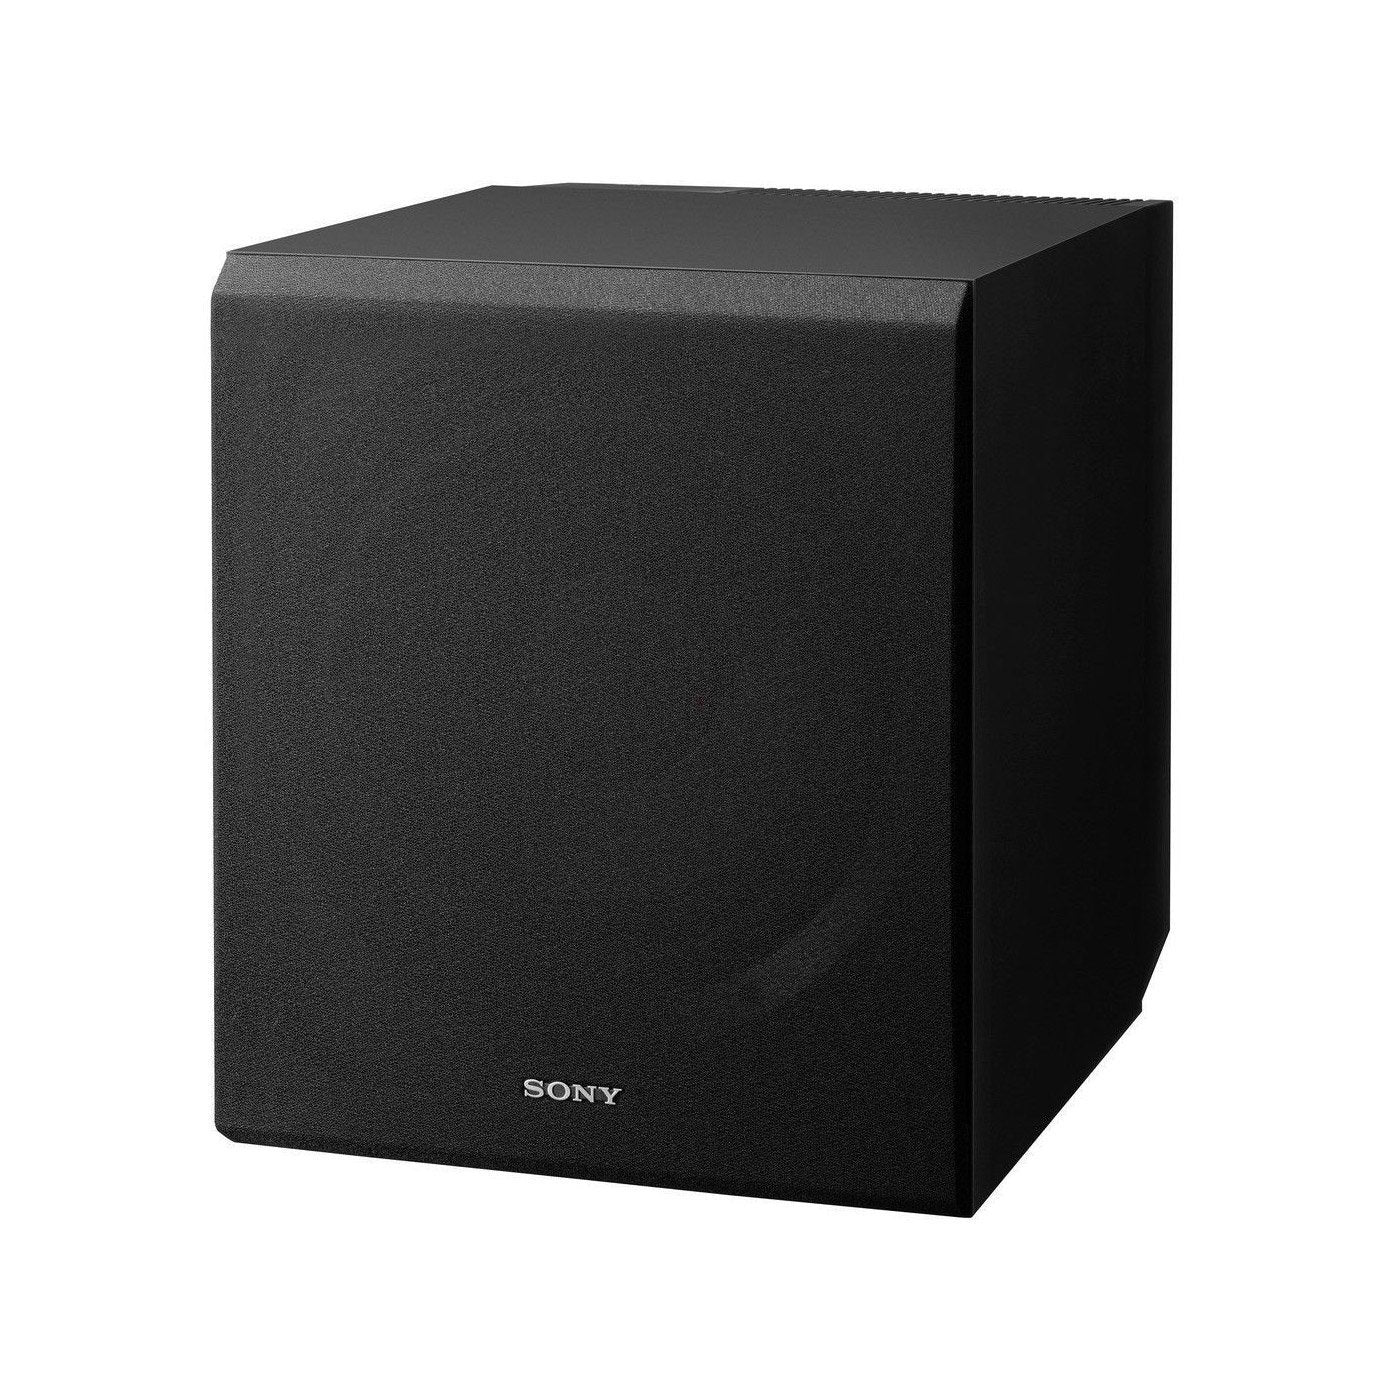 Sony SACS9 10" Active Subwoofer